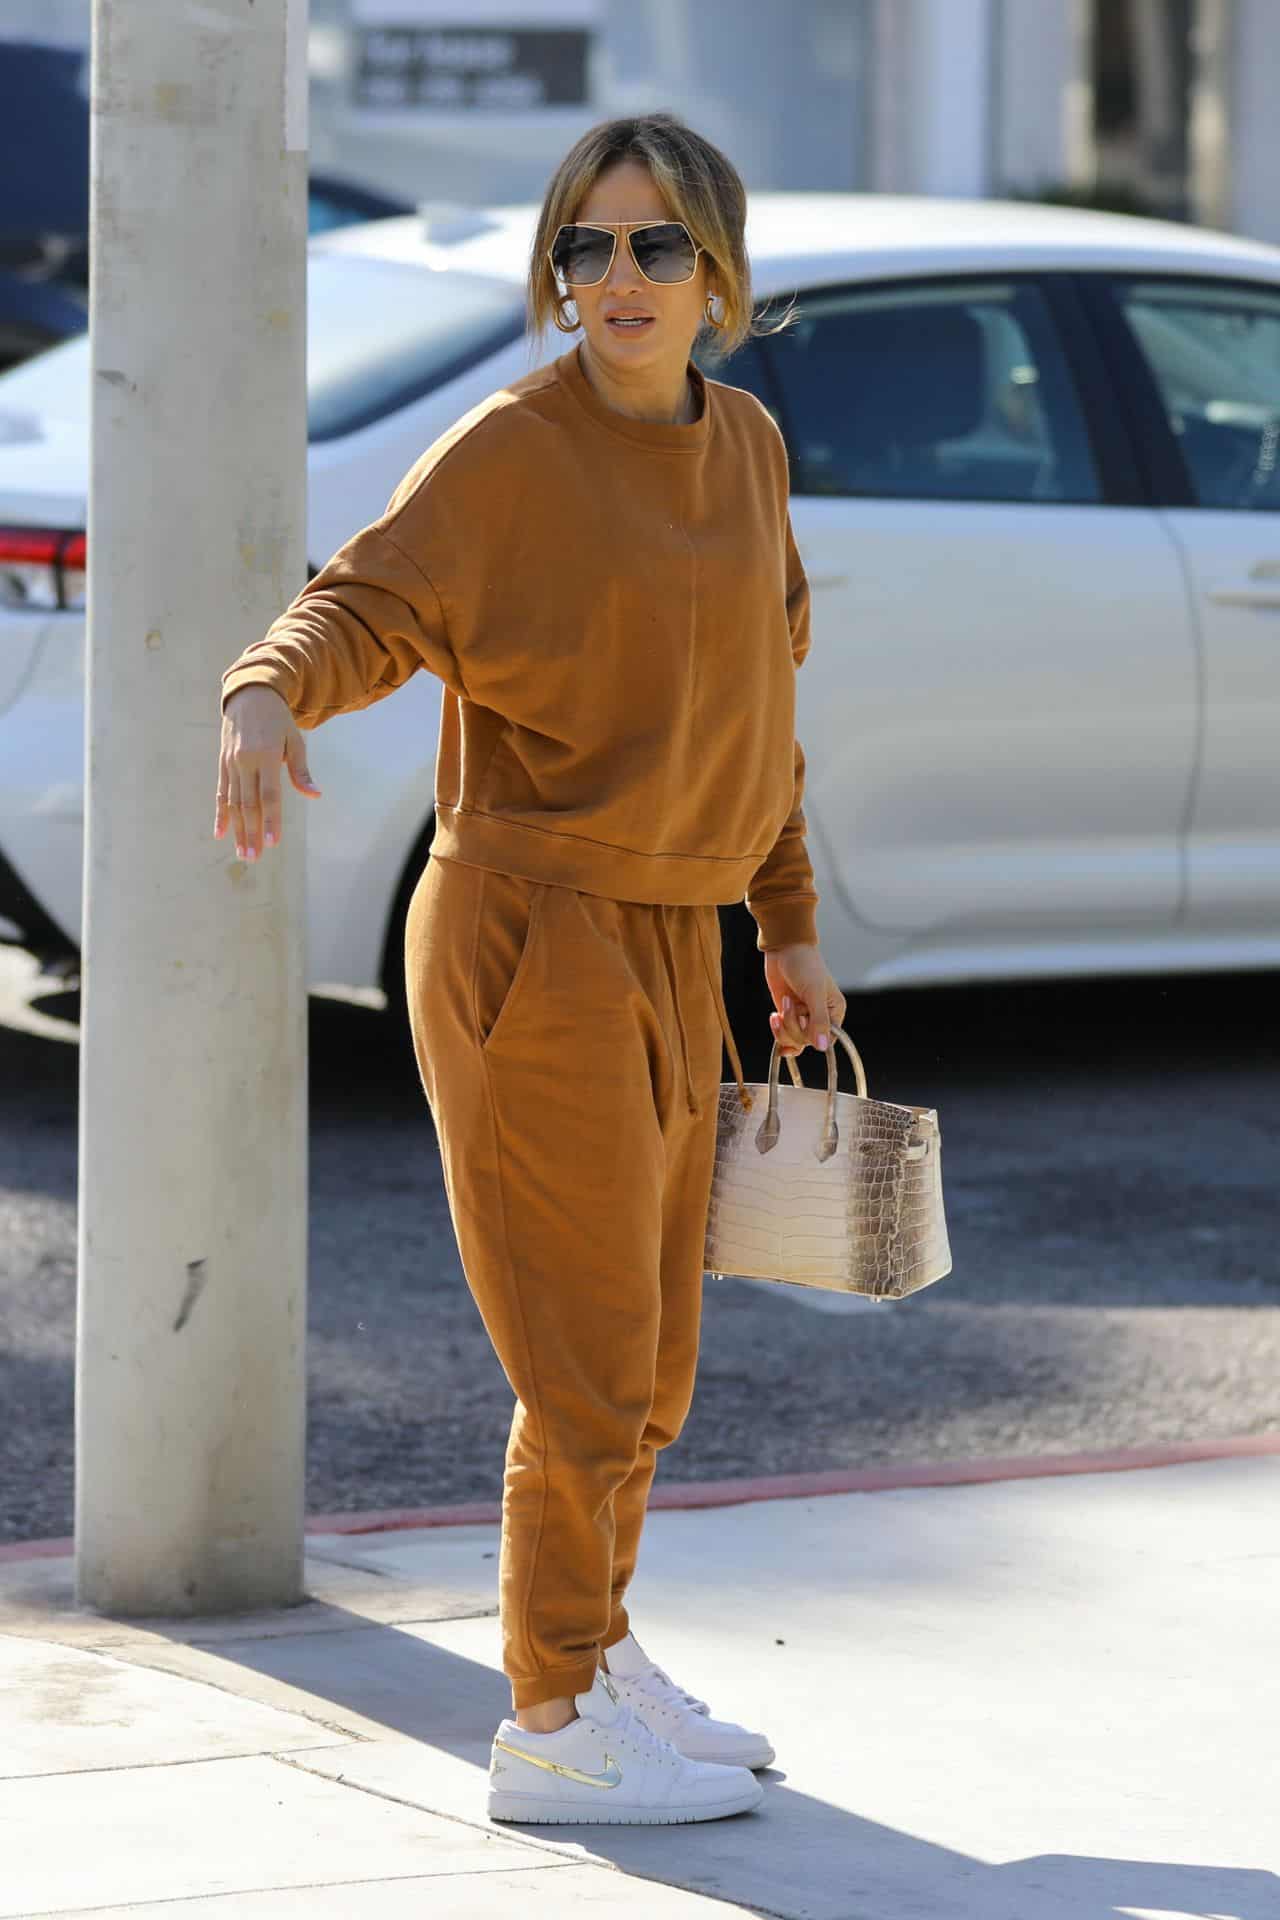 Jennifer Lopez in Comfy Outfit in Shopping for Furniture and Rugs with Daughter Emme